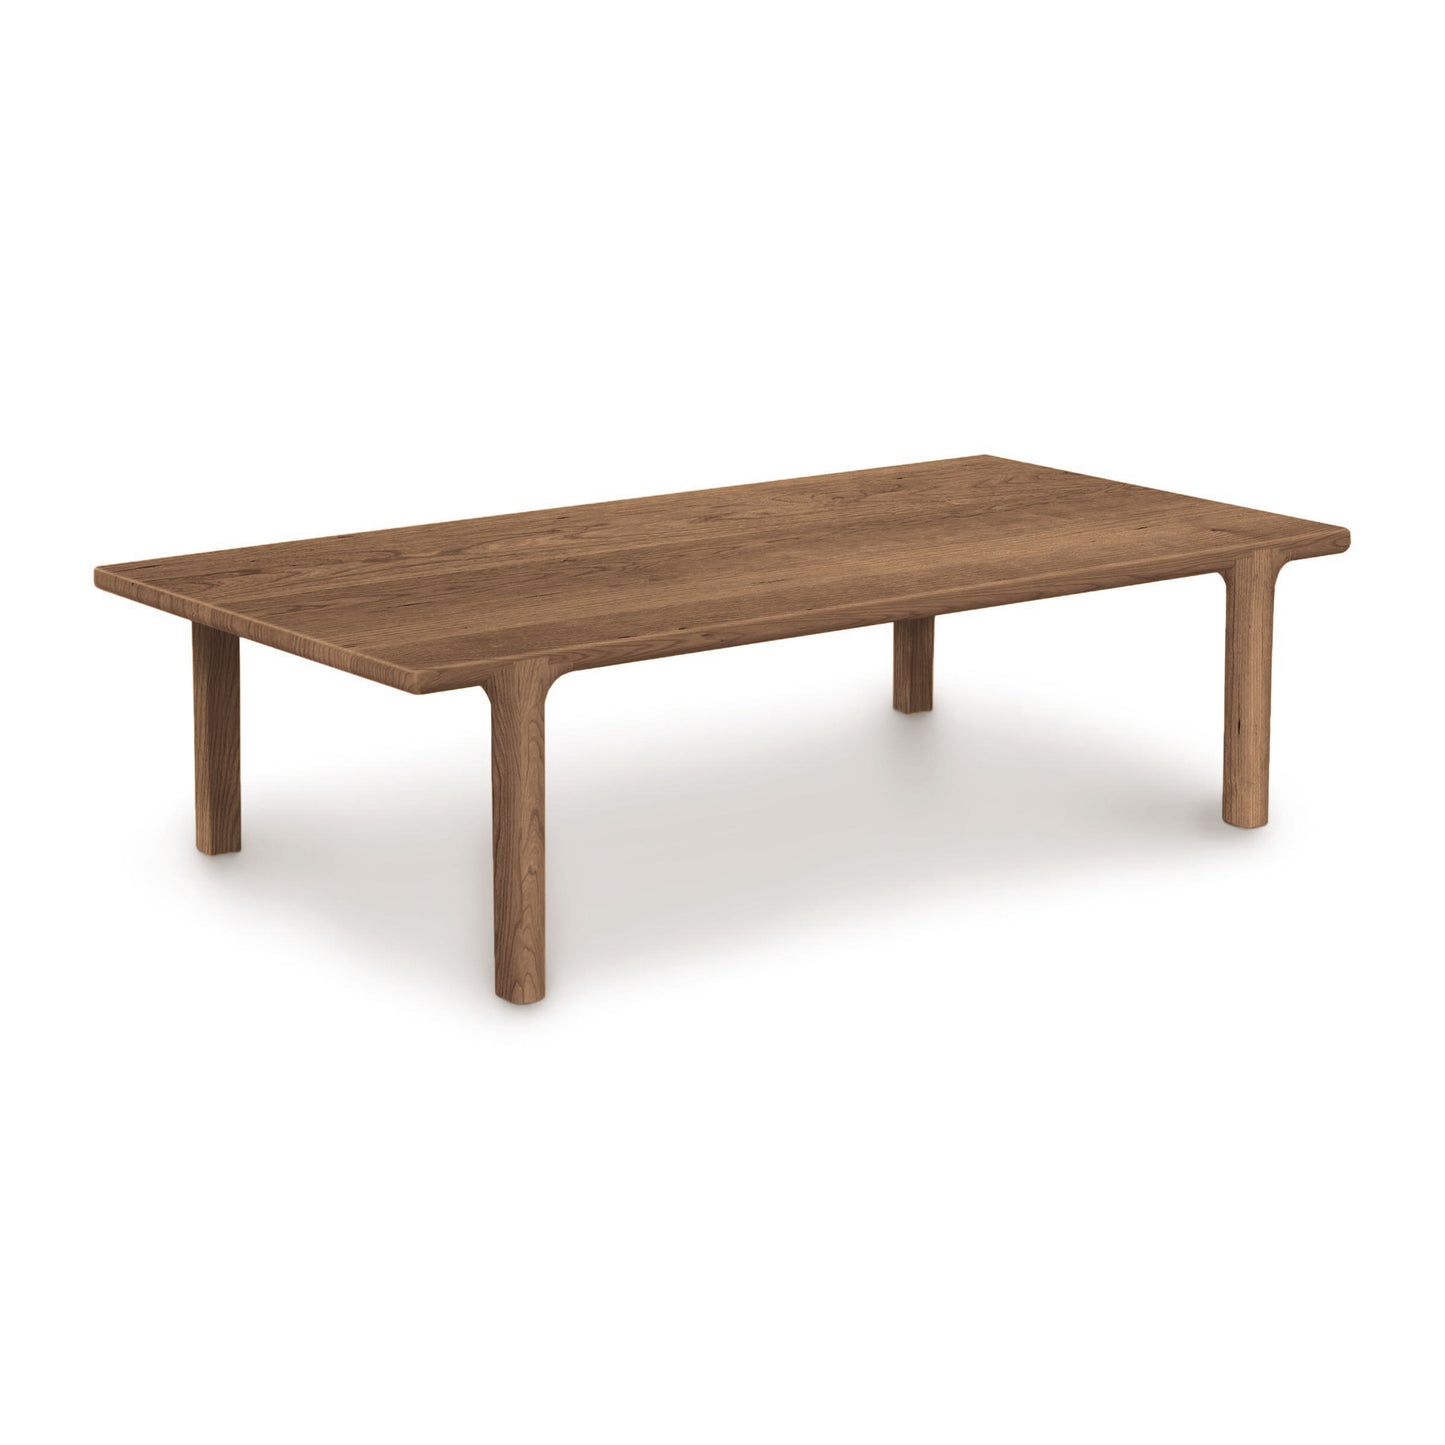 A Sierra Rectangular Coffee Table by Copeland Furniture on a white background with wood finishes.